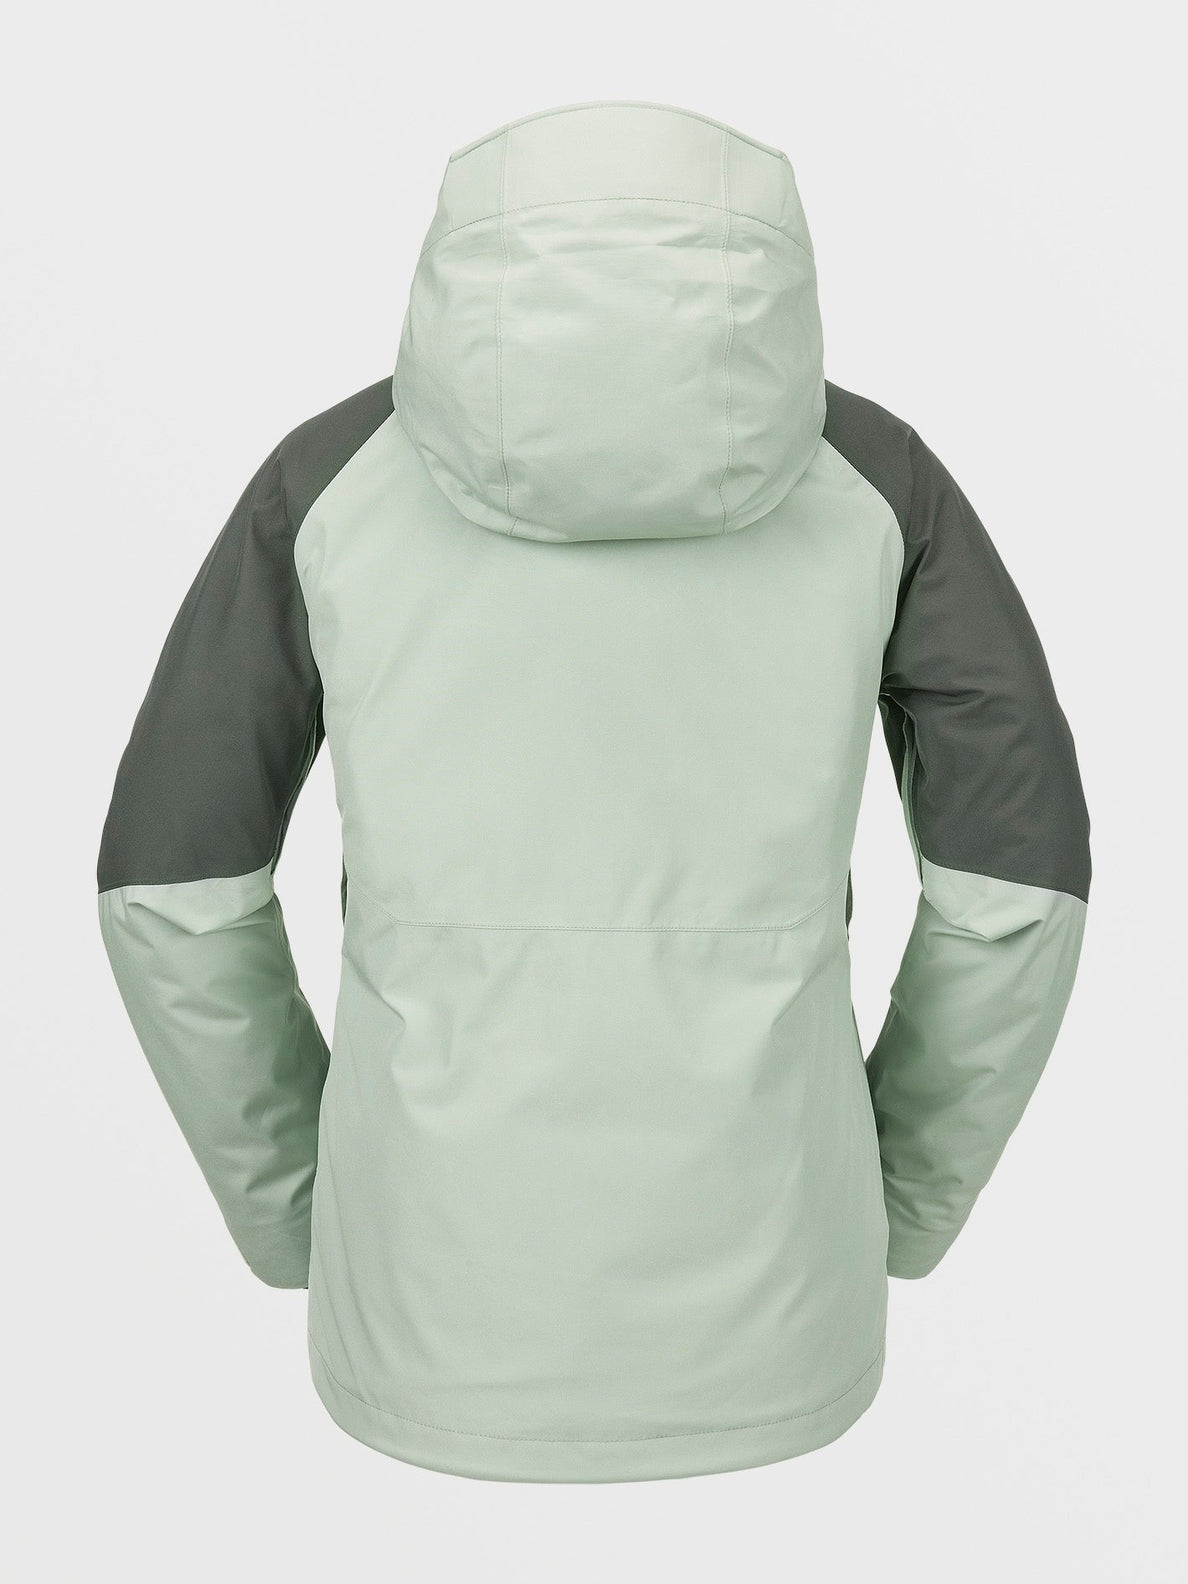 V.Co Aris Insulated Gore-Tex Jacket - SAGE FROST (H0452405_SGF) [B]